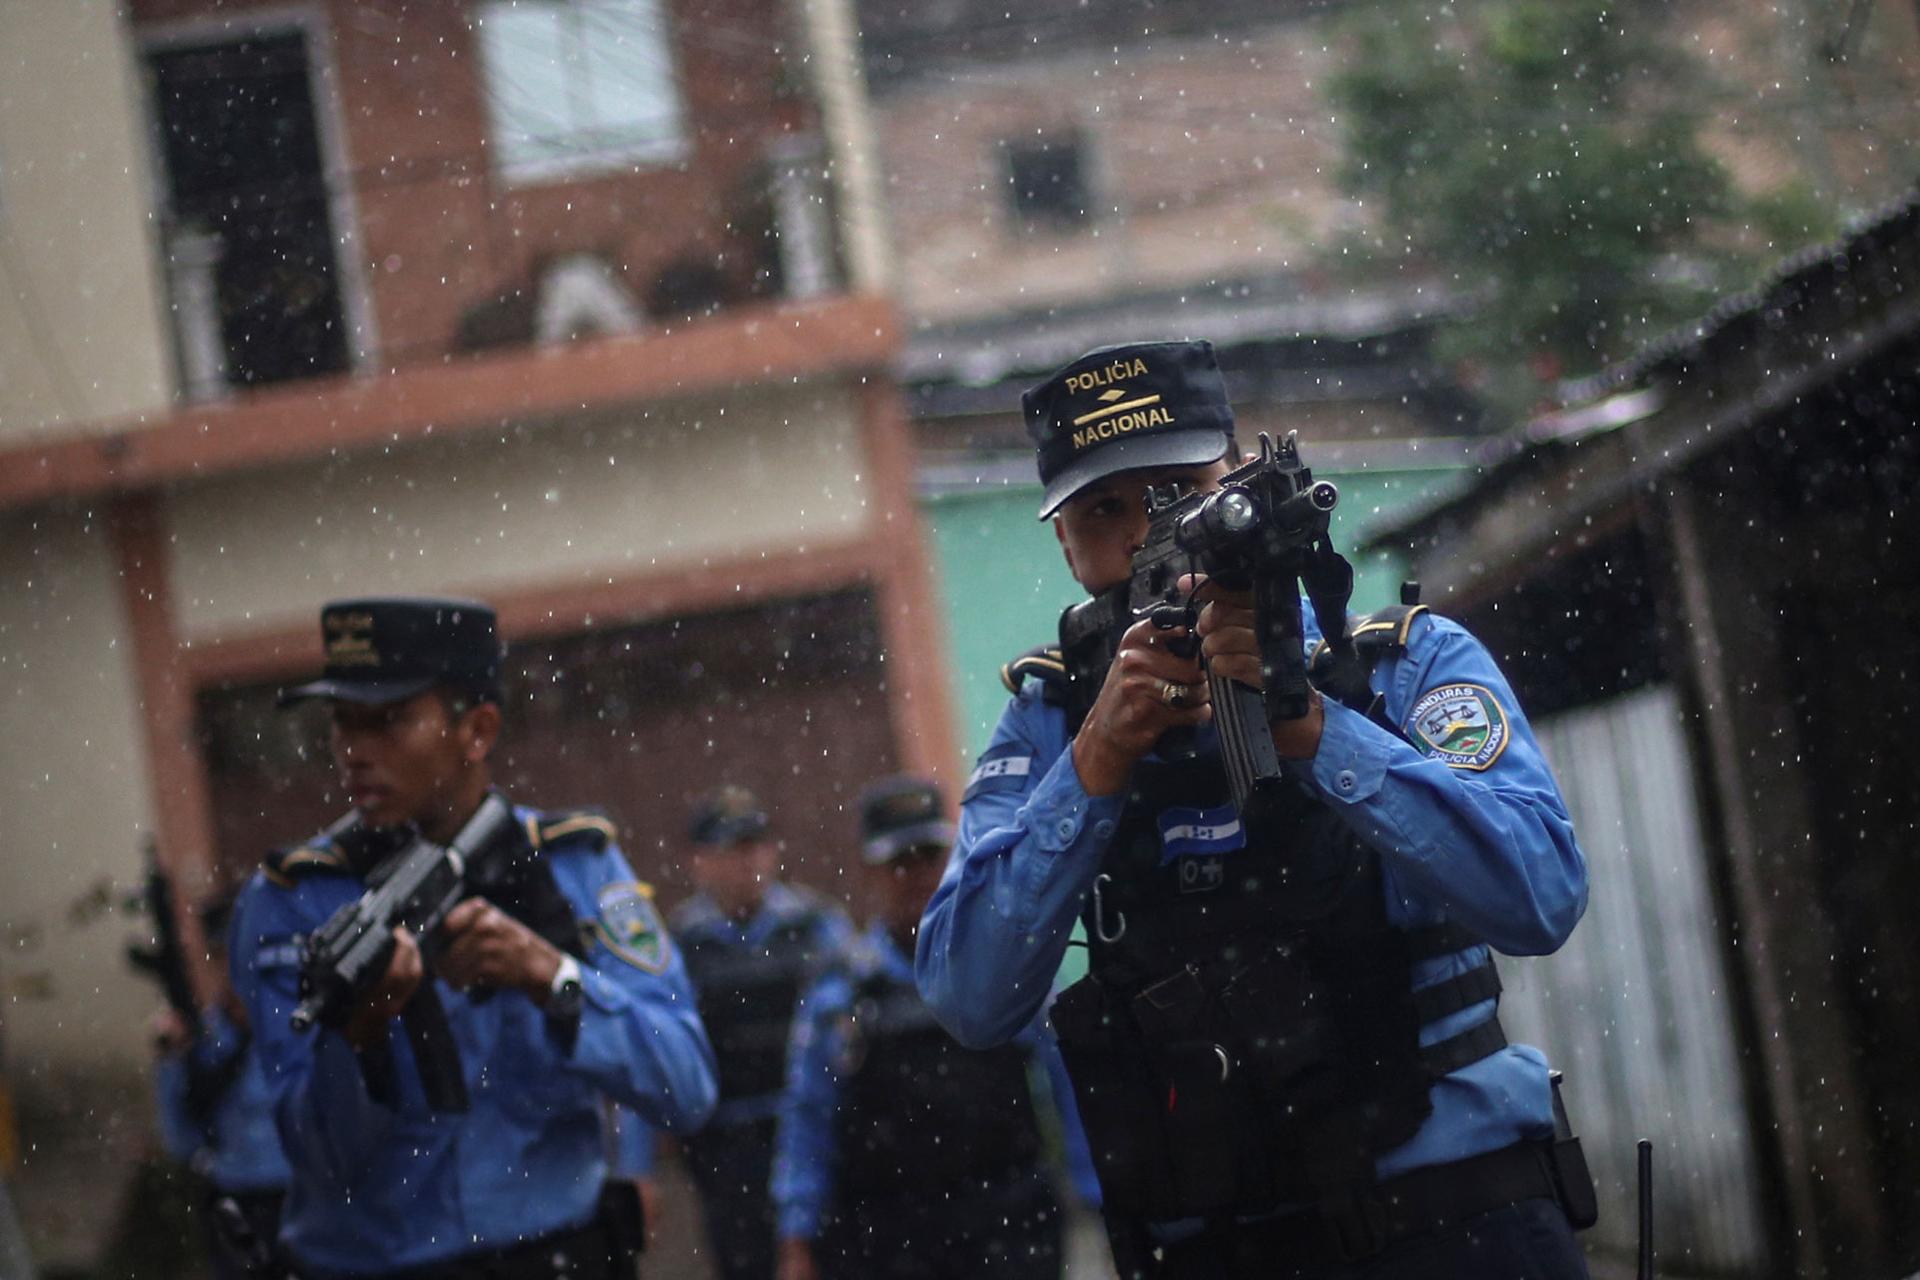 Several police officers are shown with high-powered riffles taking aim while on patrol .